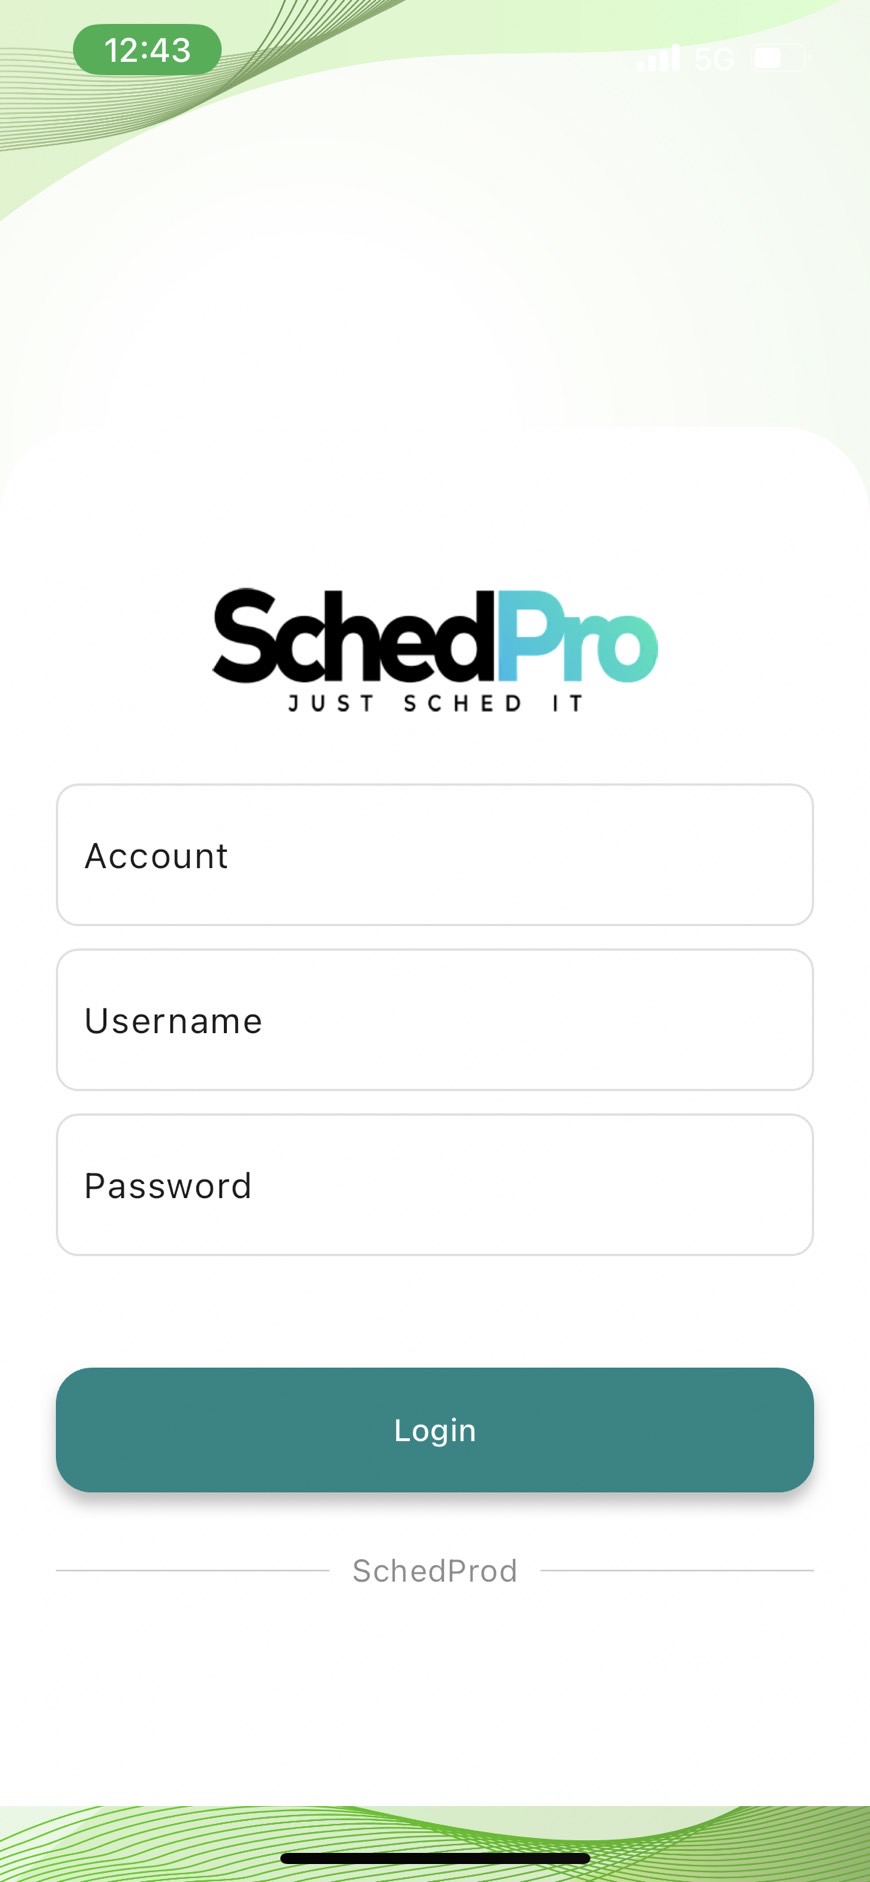 Schedpro ceo